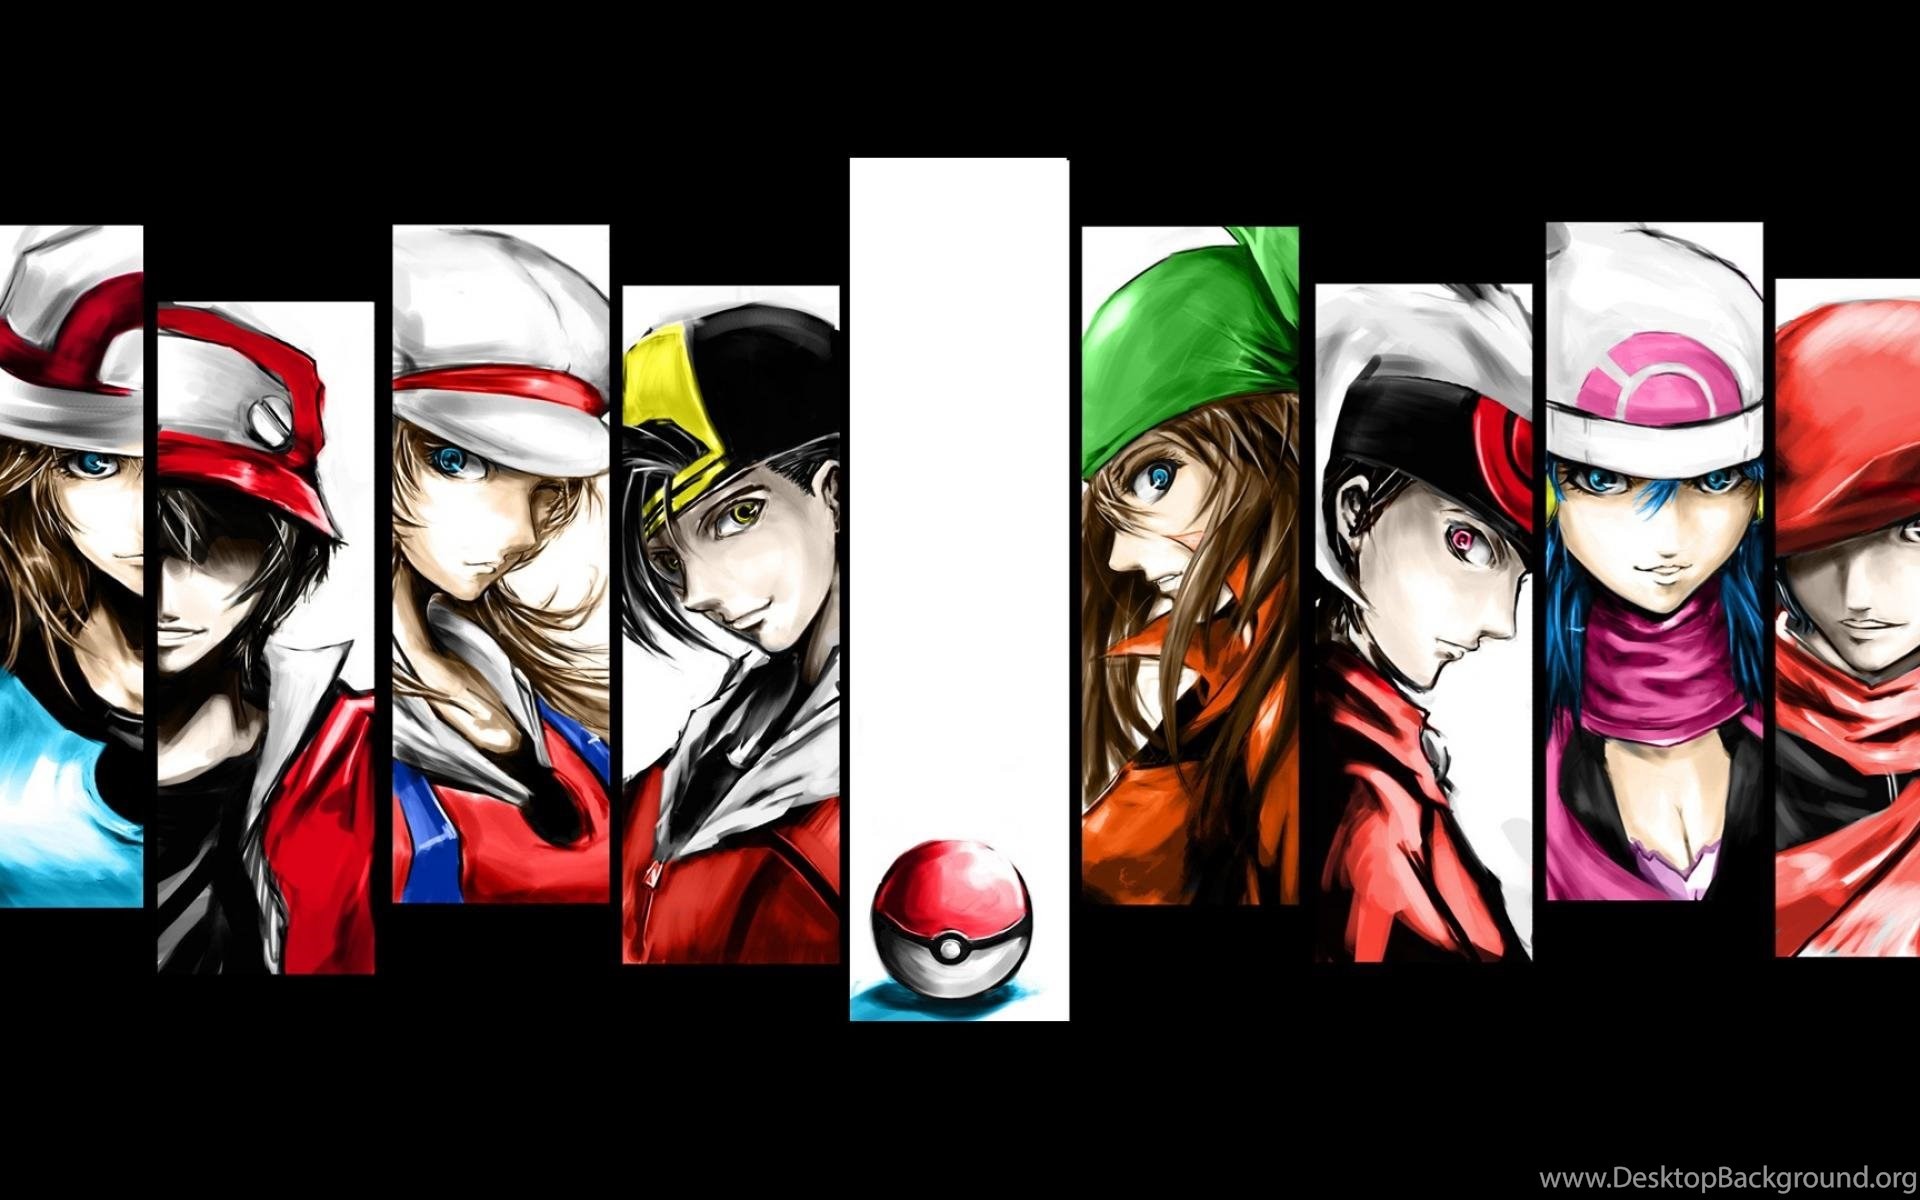 1920x1200 Pokemon Trainer Red Wallpapers Wallpapers Cave Desktop Background 365020  Pokemon Trainer Red Wallpapers Wallpapers Cave 